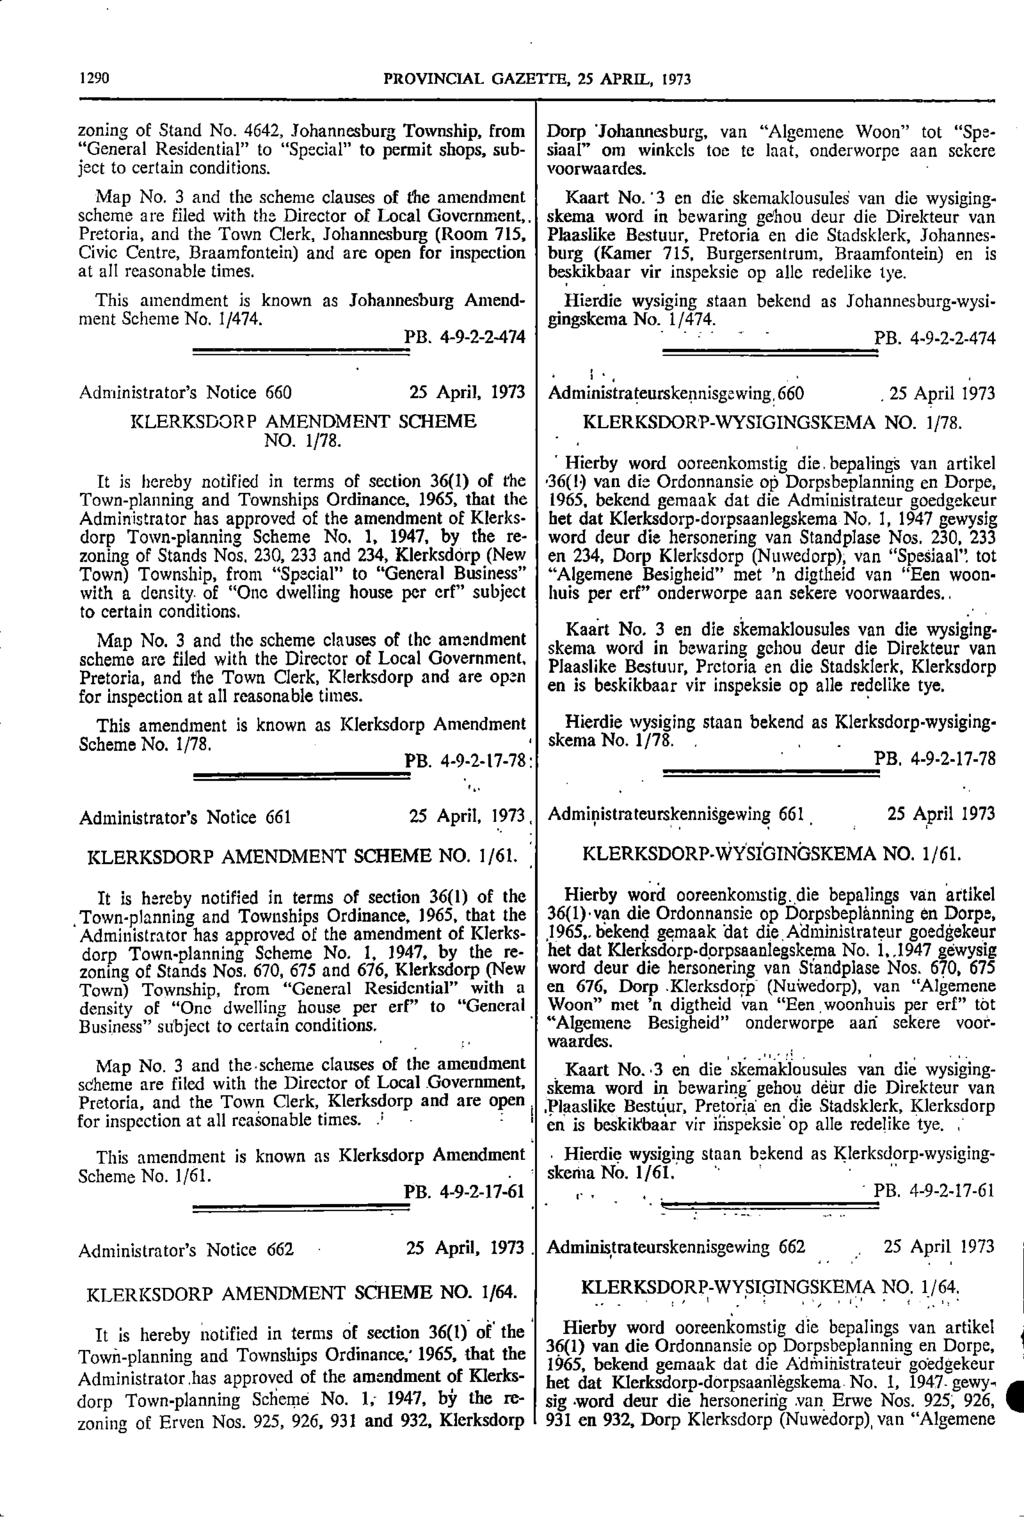 1290 PROVINCIAL GAZETTE 25 APRIL 1973 zoning of Stand No 4642 Johannesburg Township from Dorp Johannesburg van "Algemene Woon" tot "Spe "General Residential" to "Special" to permit shops sub siaal"